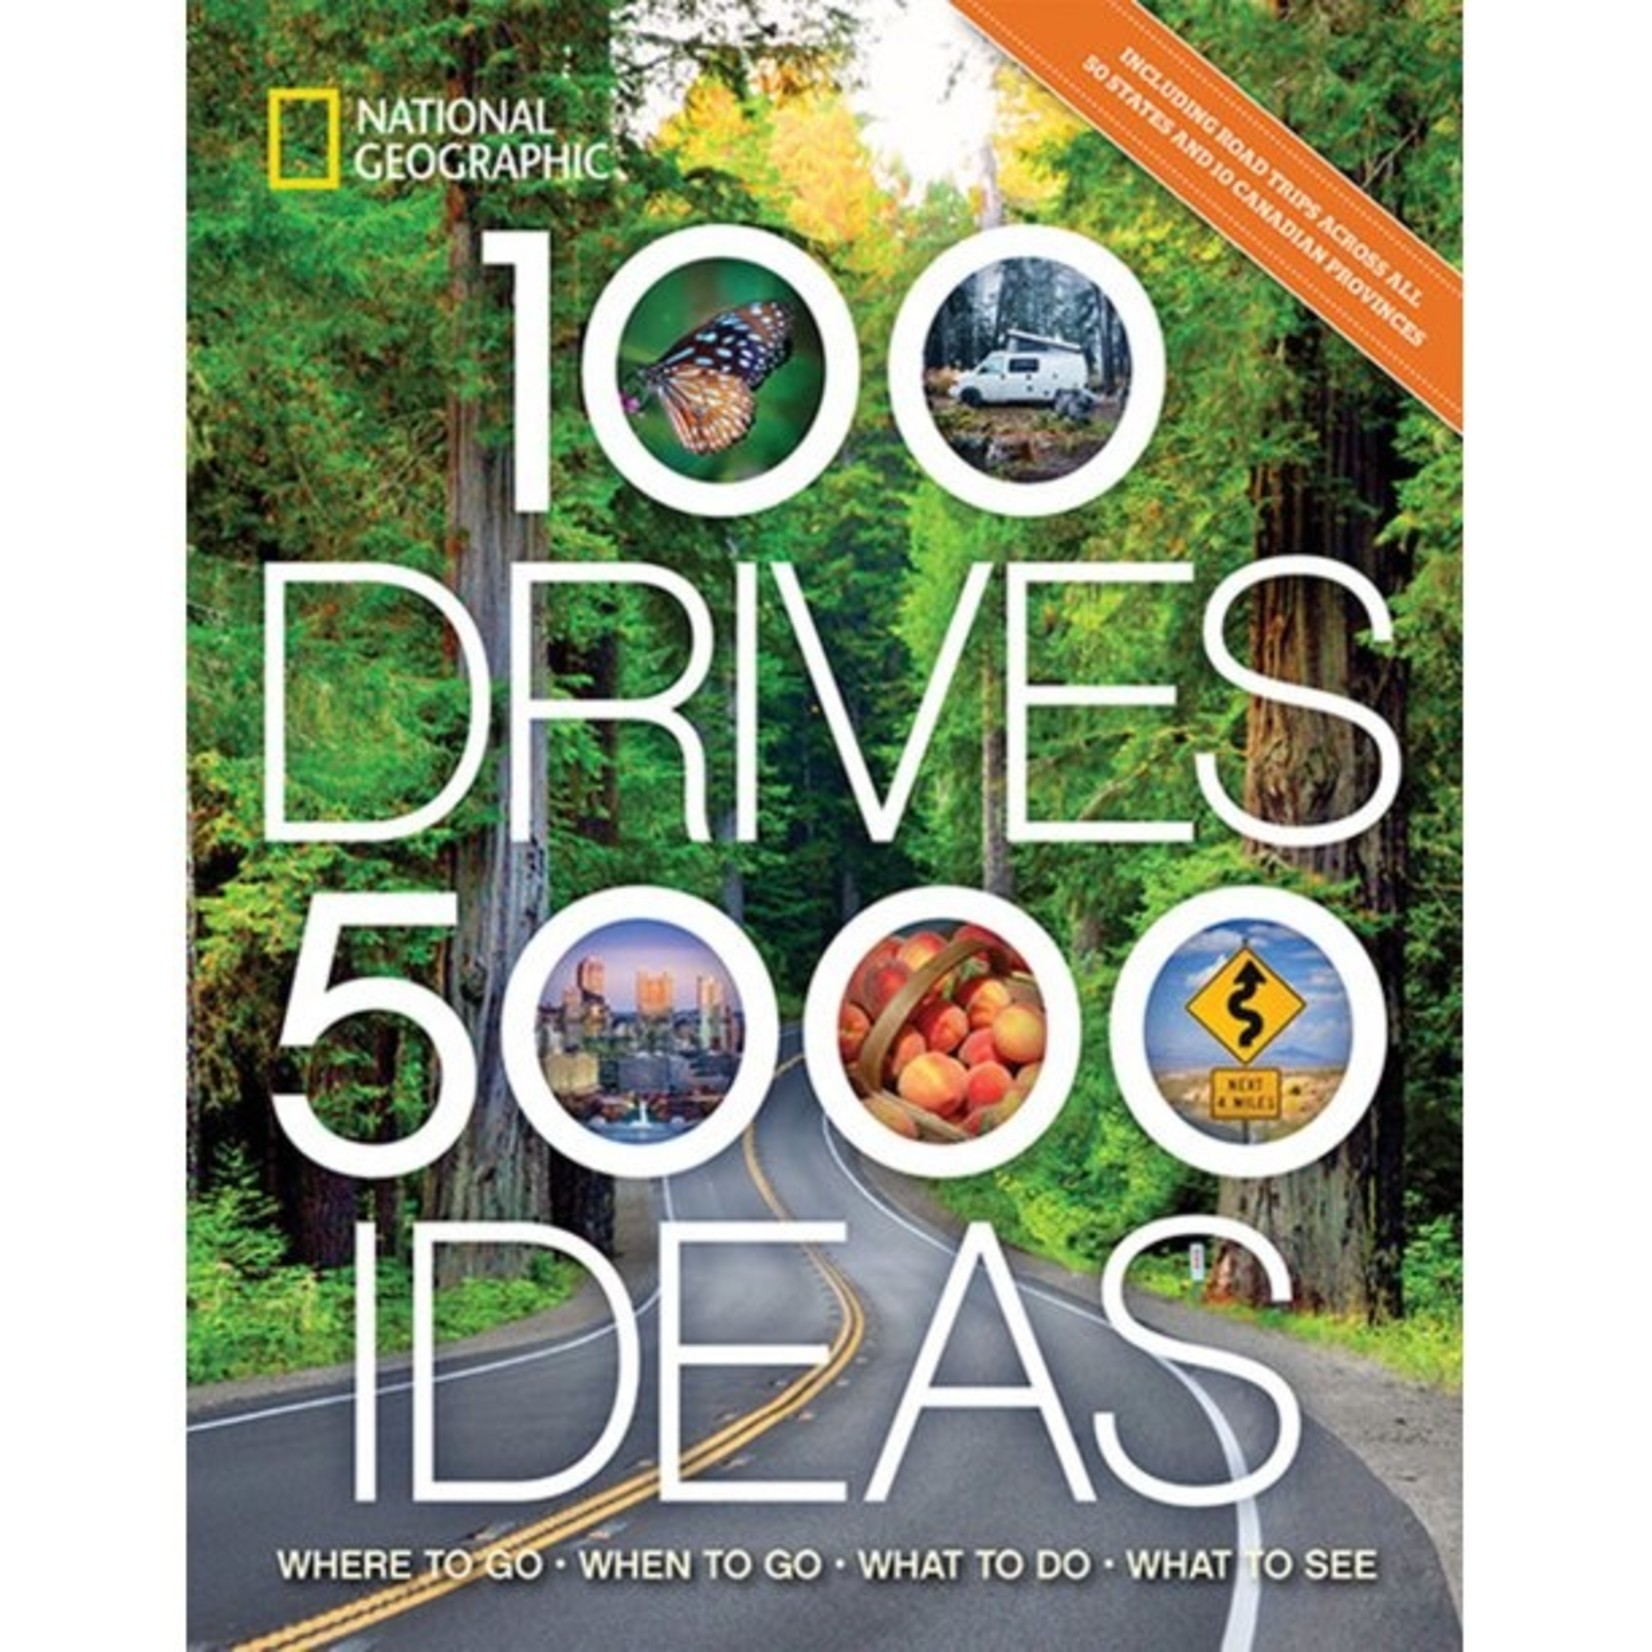 National Geographic 100 Drives 5000 Ideas